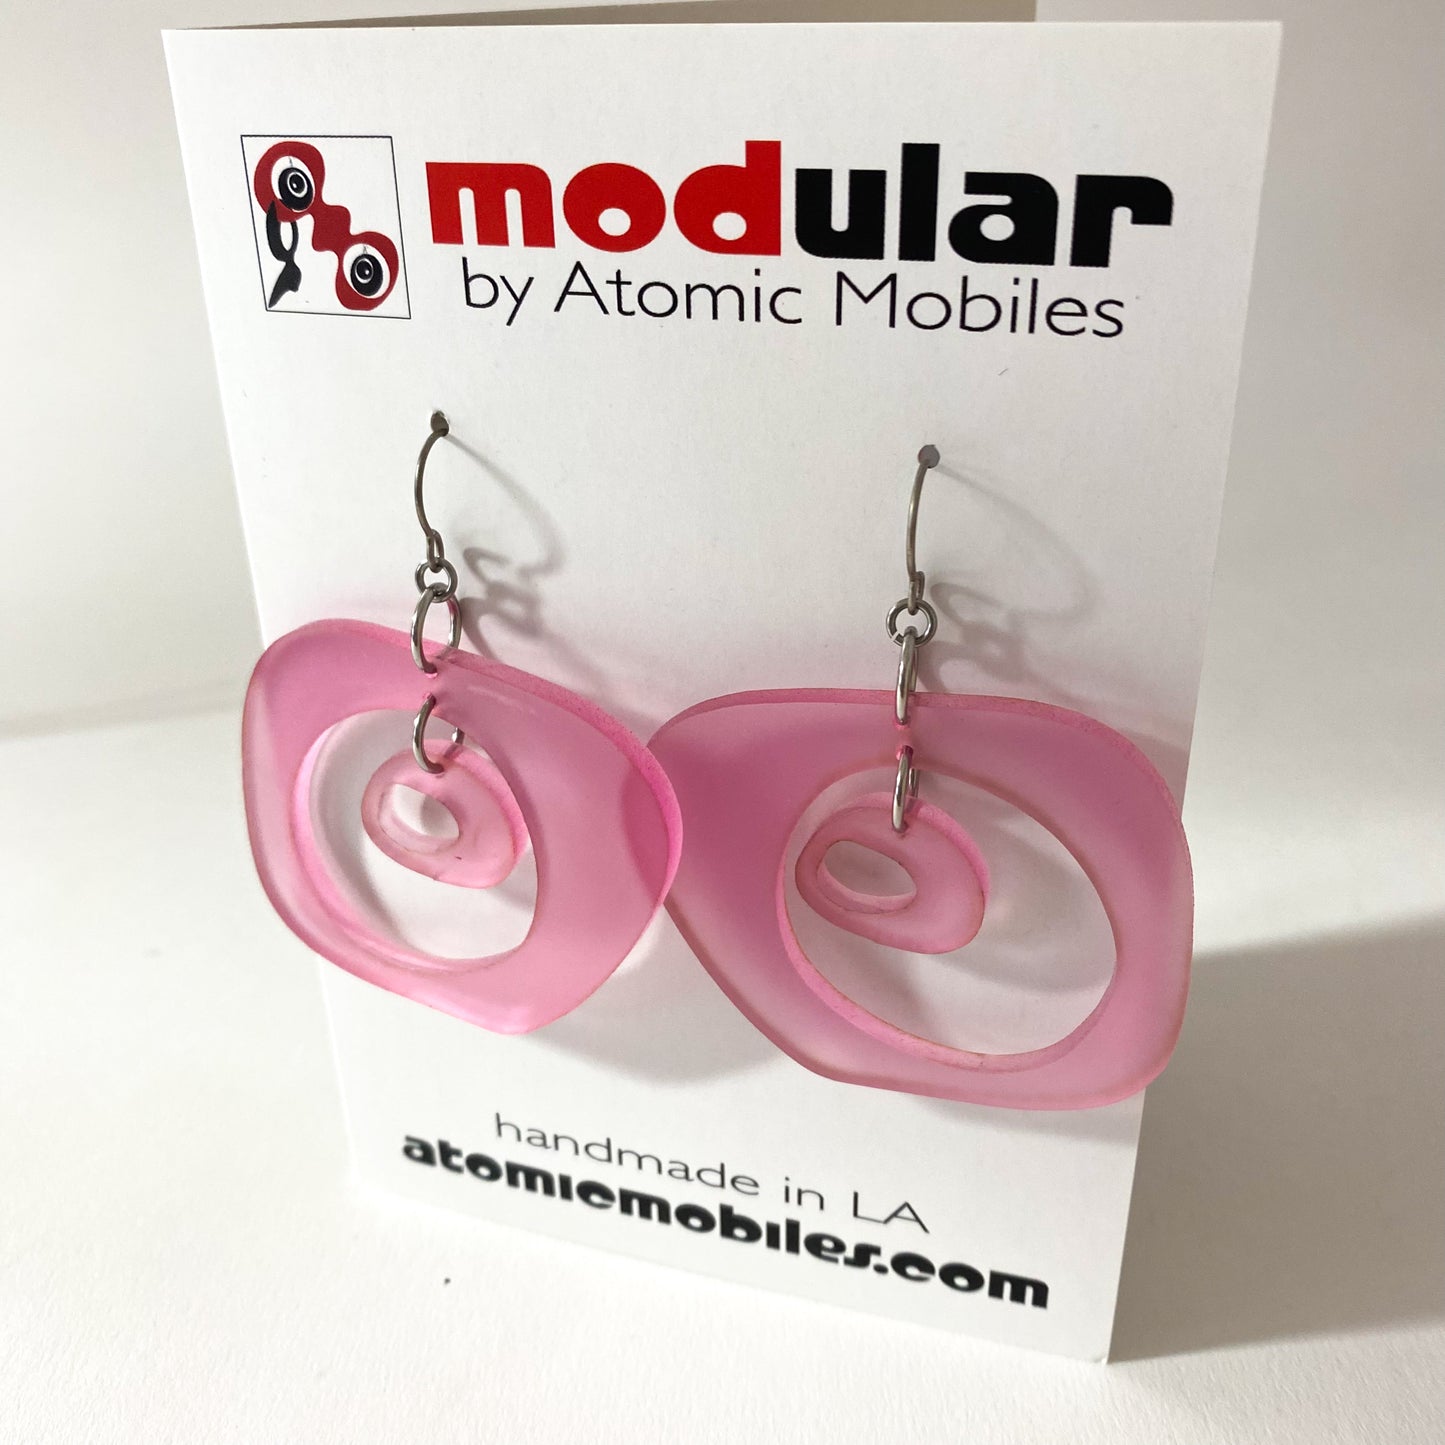 Frosted Pink Paris retro mid century modern statement fashion earrings by AtomicMobiles.com